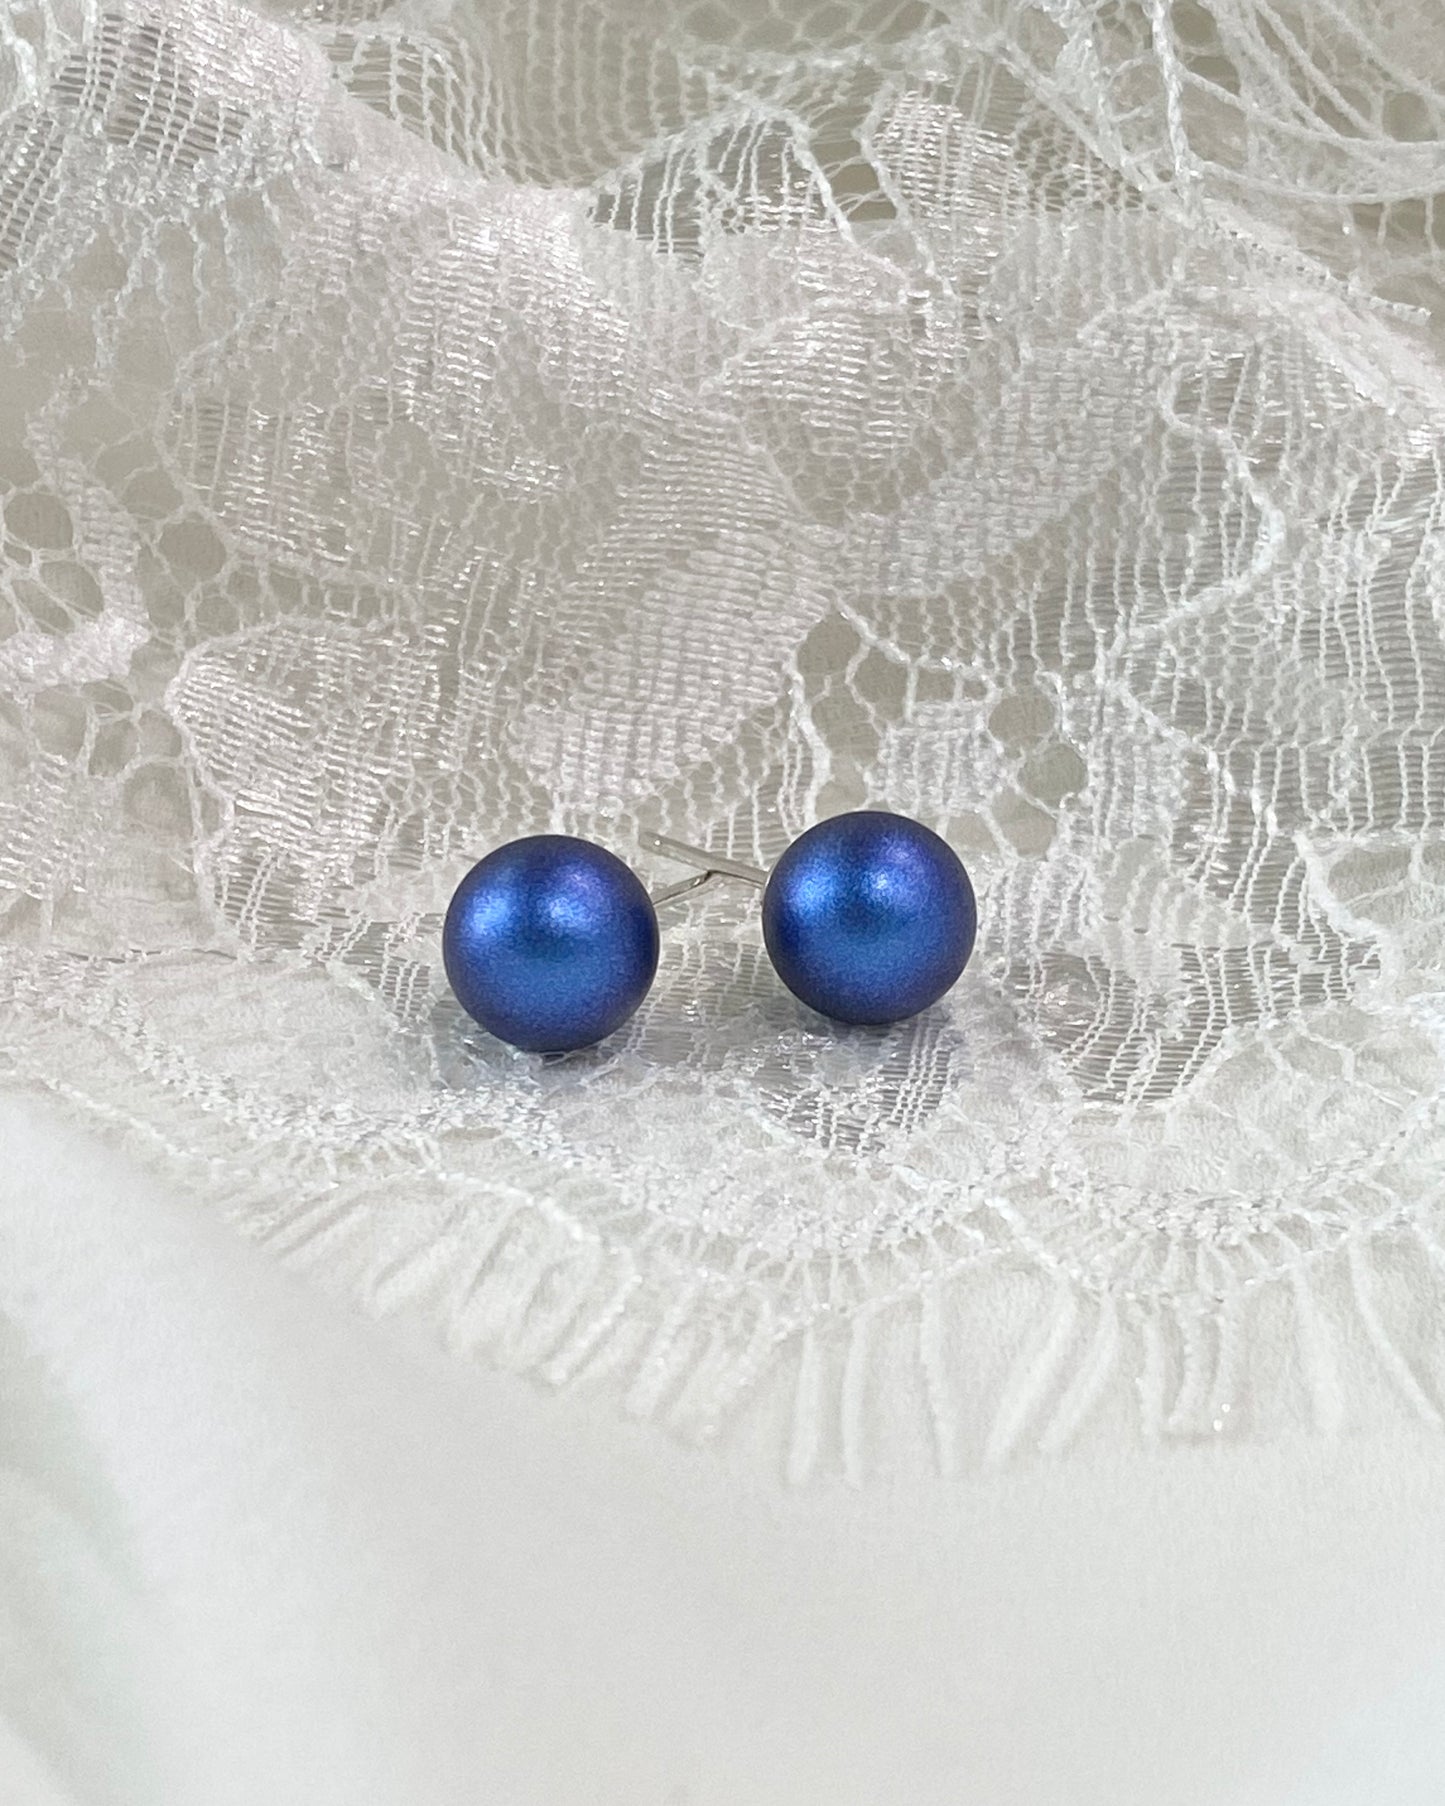 Lennon Royal Blue Pearl Necklace and Stud Earrings Set